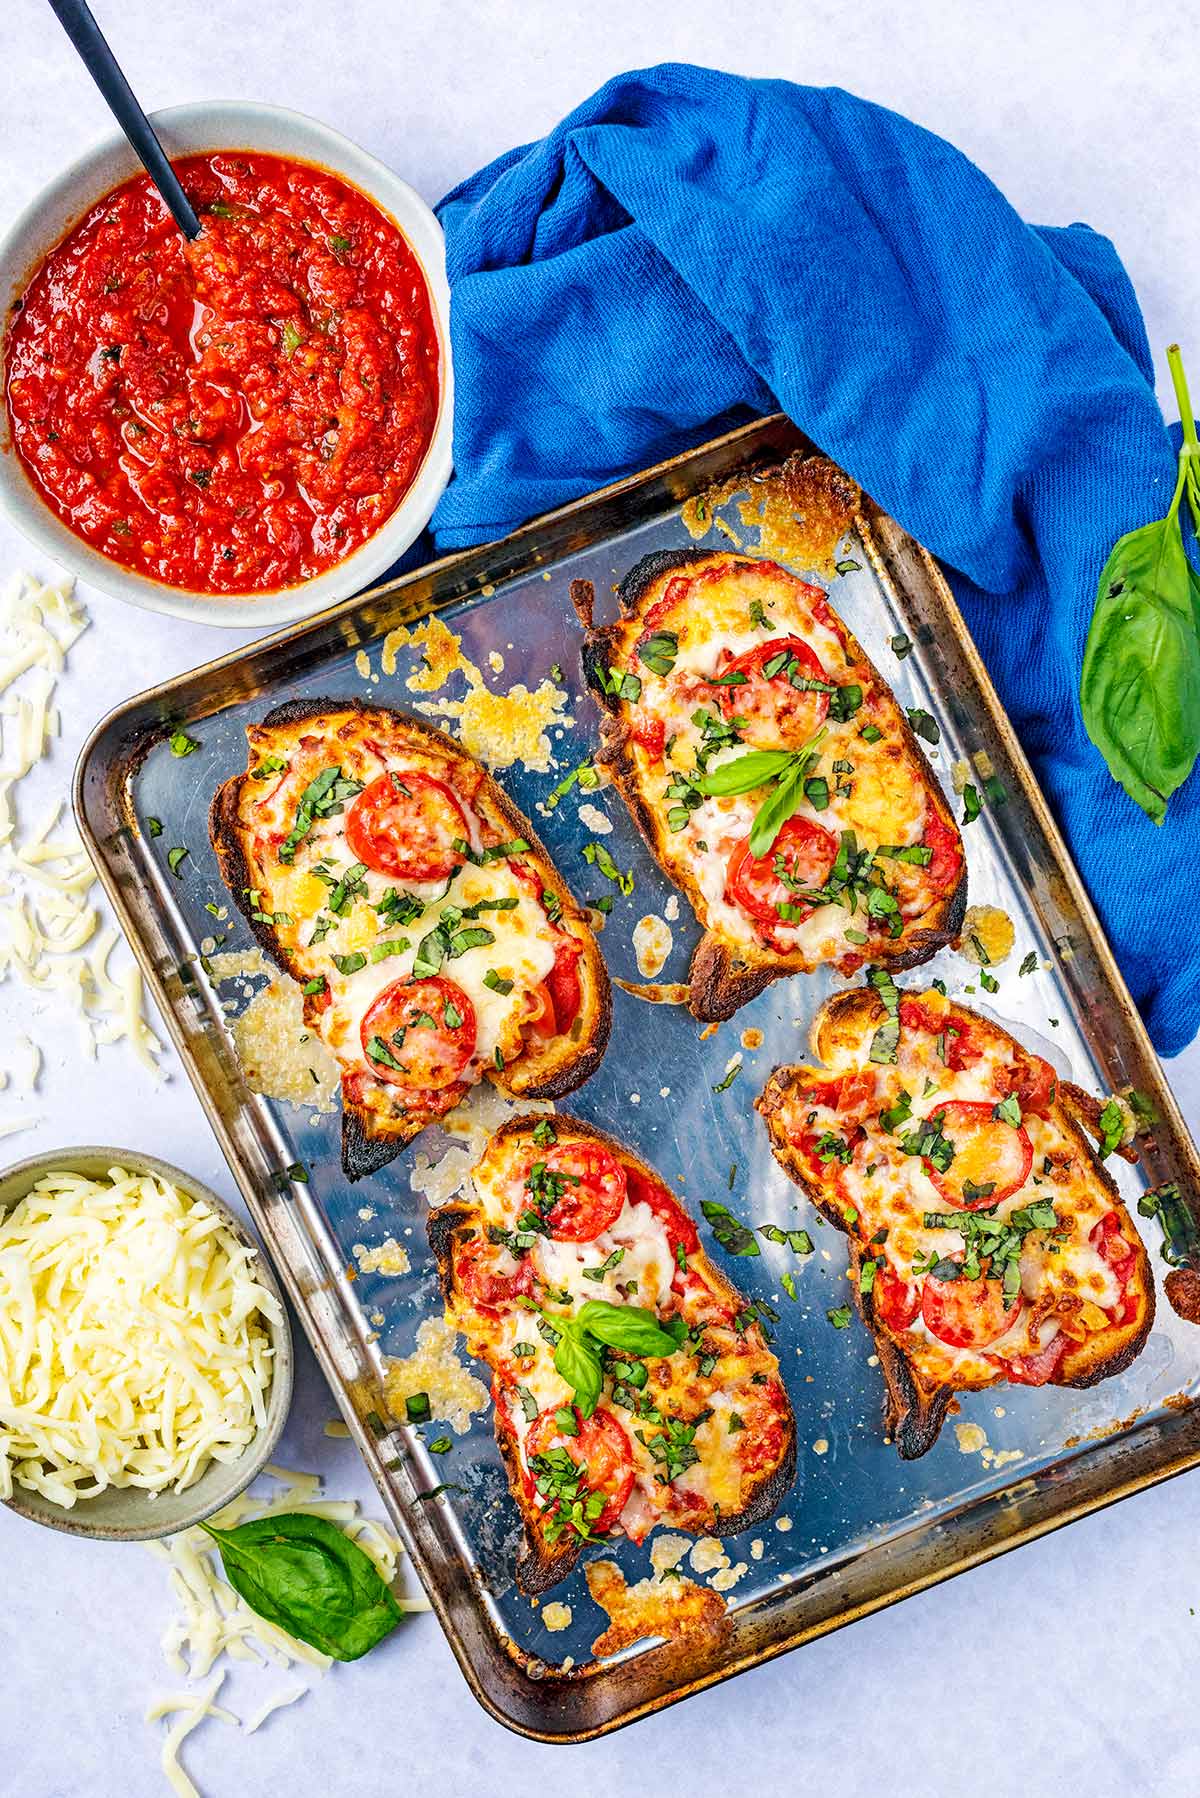 Four slices of pizza toast on a baking tray next to a bowl of pizza sauce.